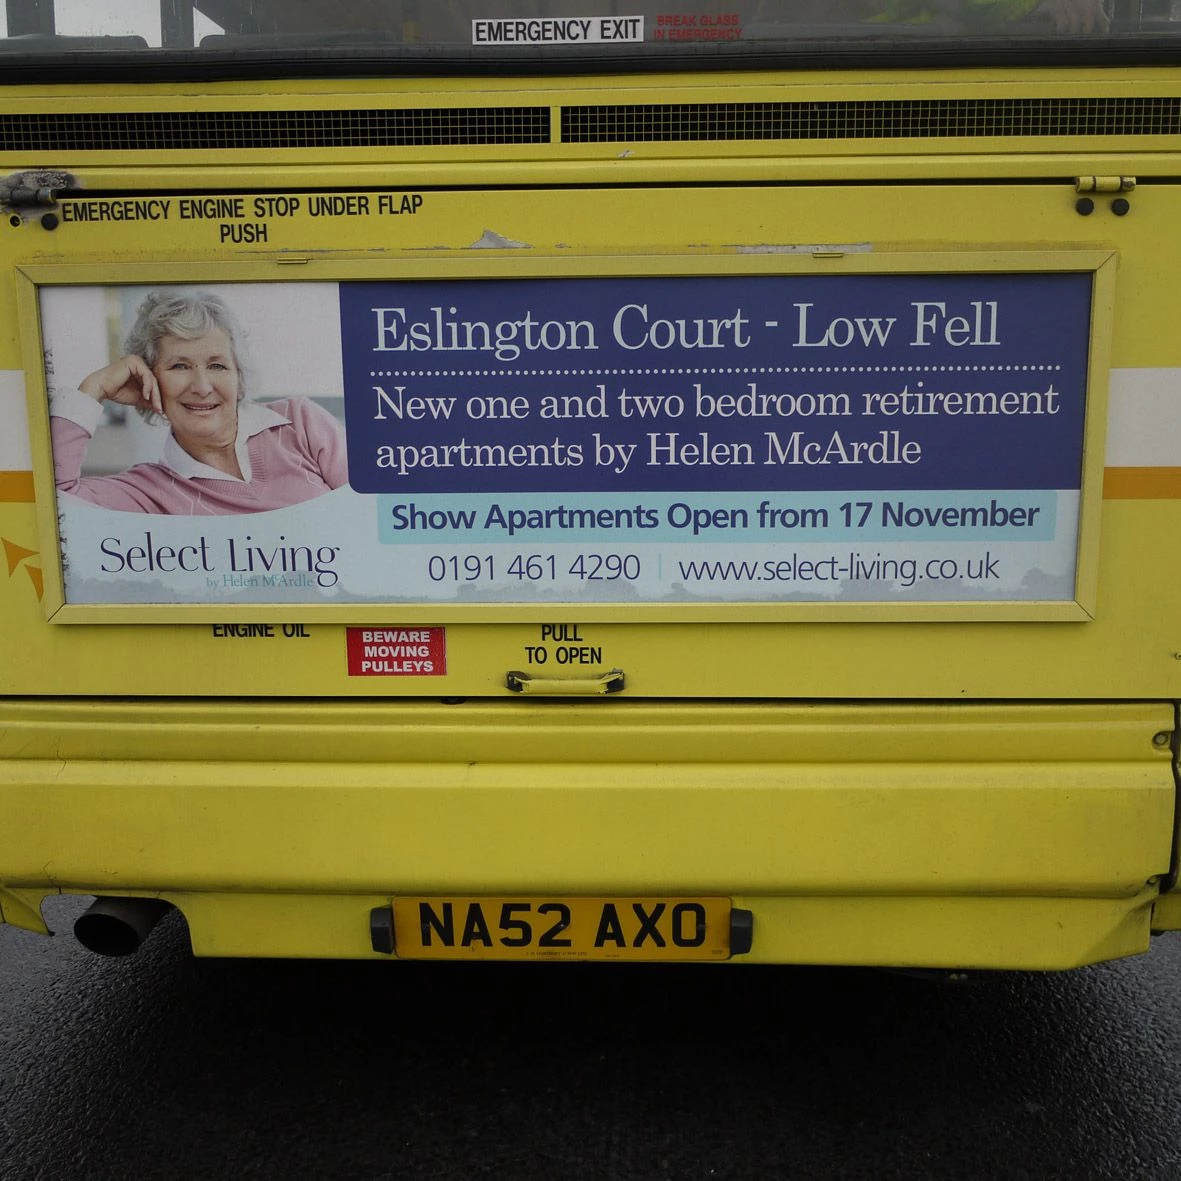 Select Living campaign in action on the local bus route